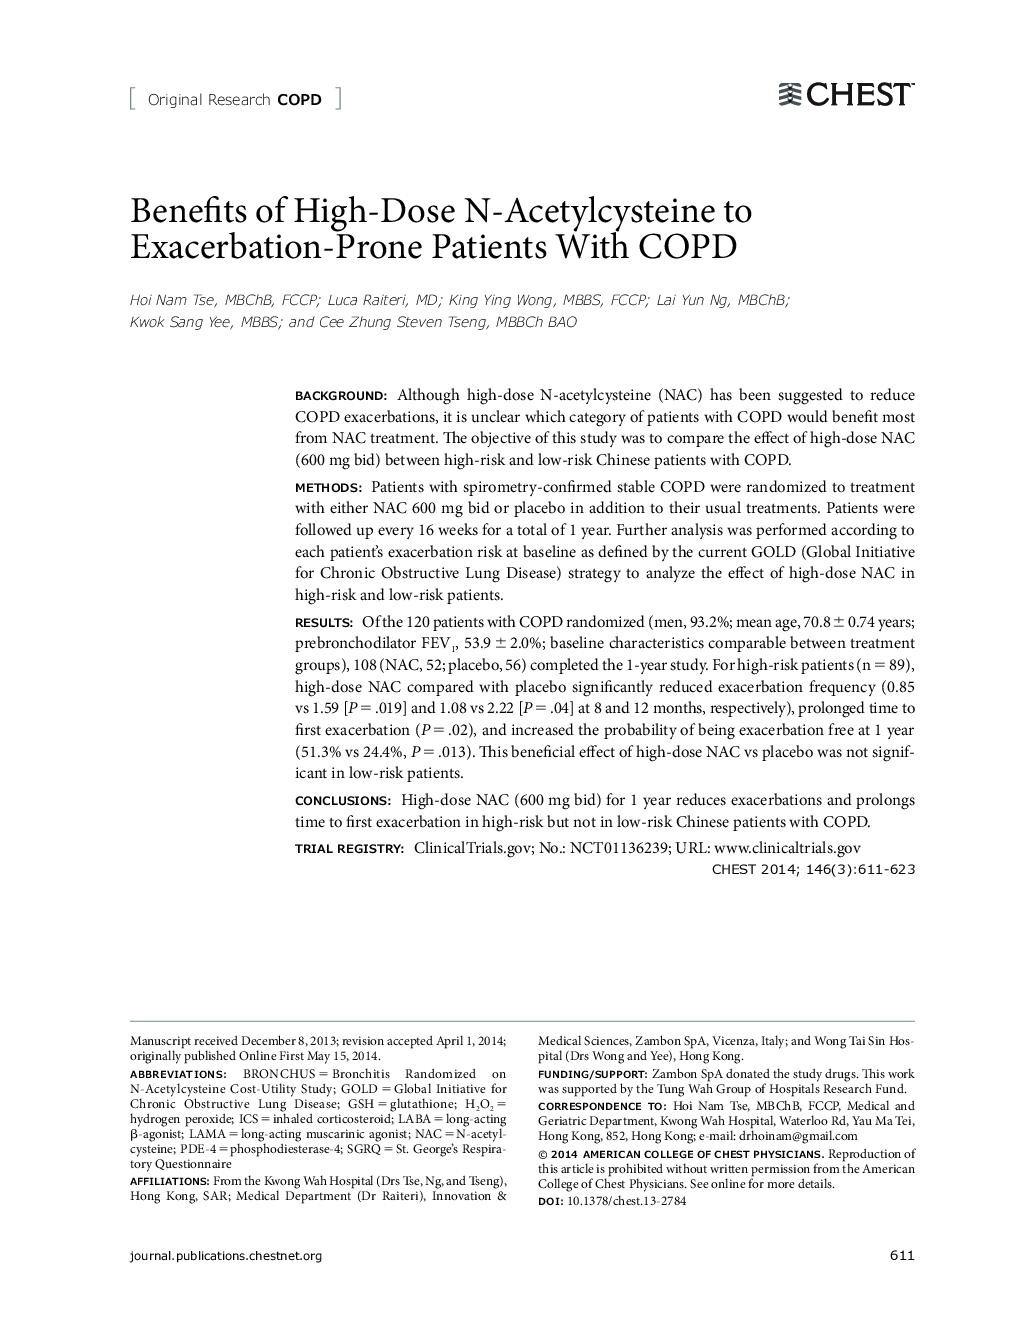 Benefits of High-Dose N-Acetylcysteine to Exacerbation-Prone Patients With COPD 